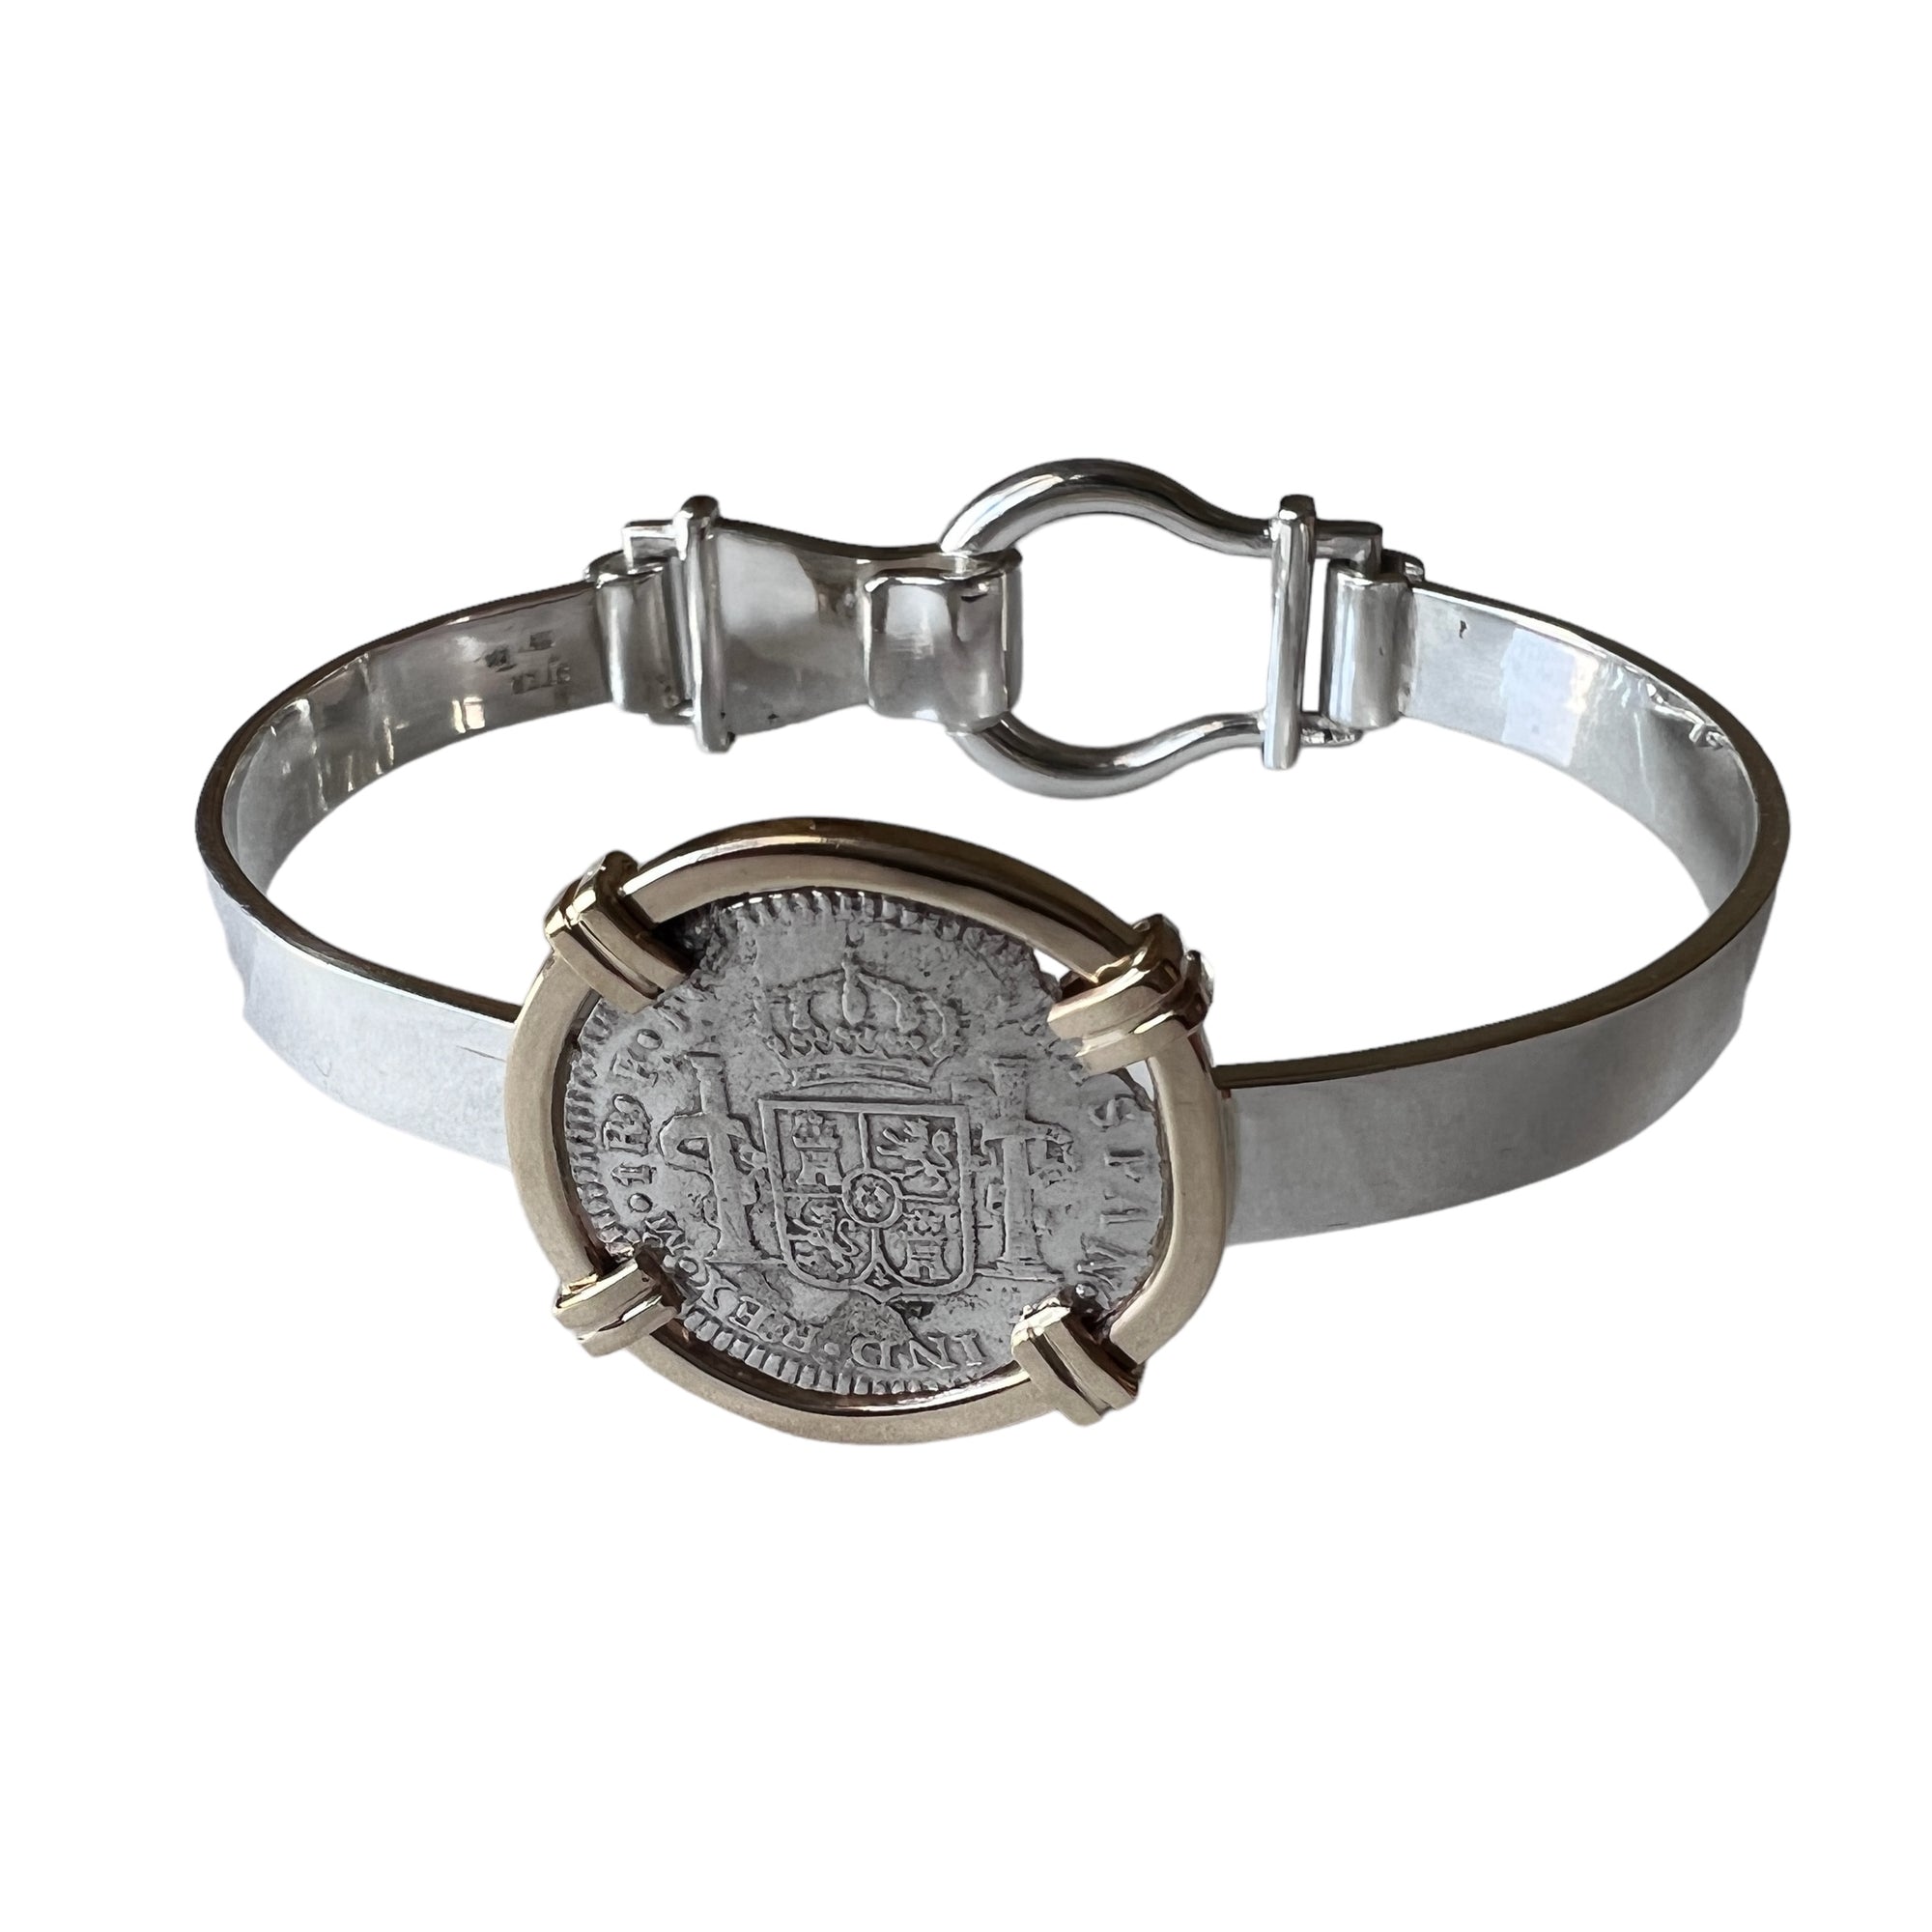 El Cazador Shipwreck - 1 Reales - Reign of Carlos III - Dated 1781 - Presented in a custom Sterling  Silver bracelet with a 14K Gold frame